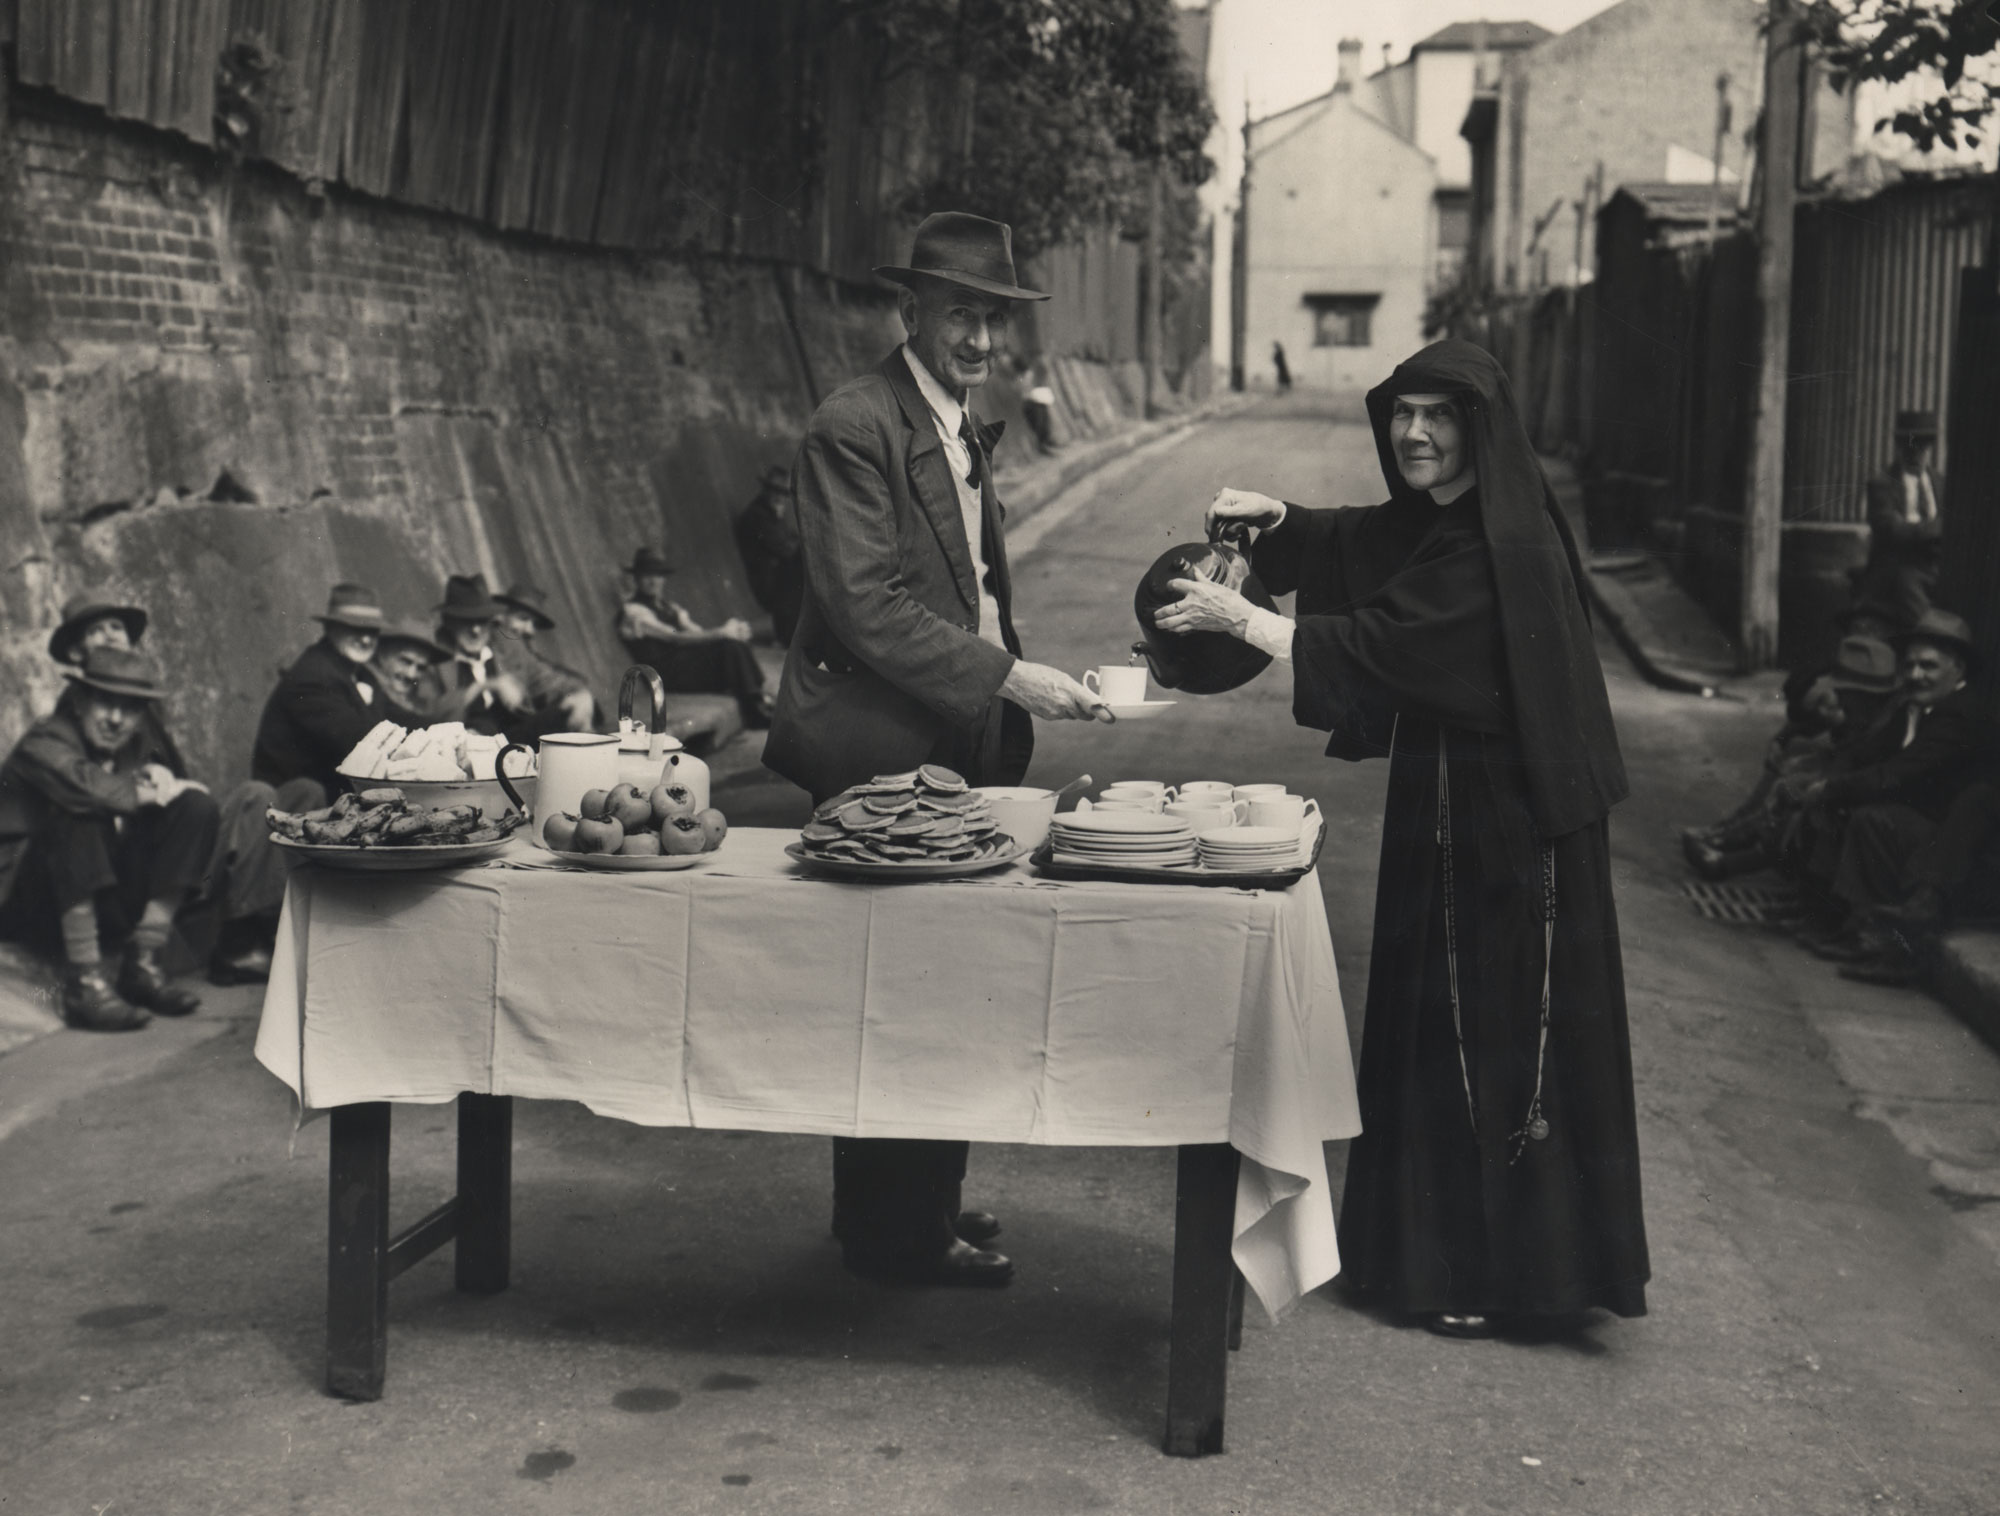 Sister Maurus Tierney, serving food to unemployed men during the Great Depression.